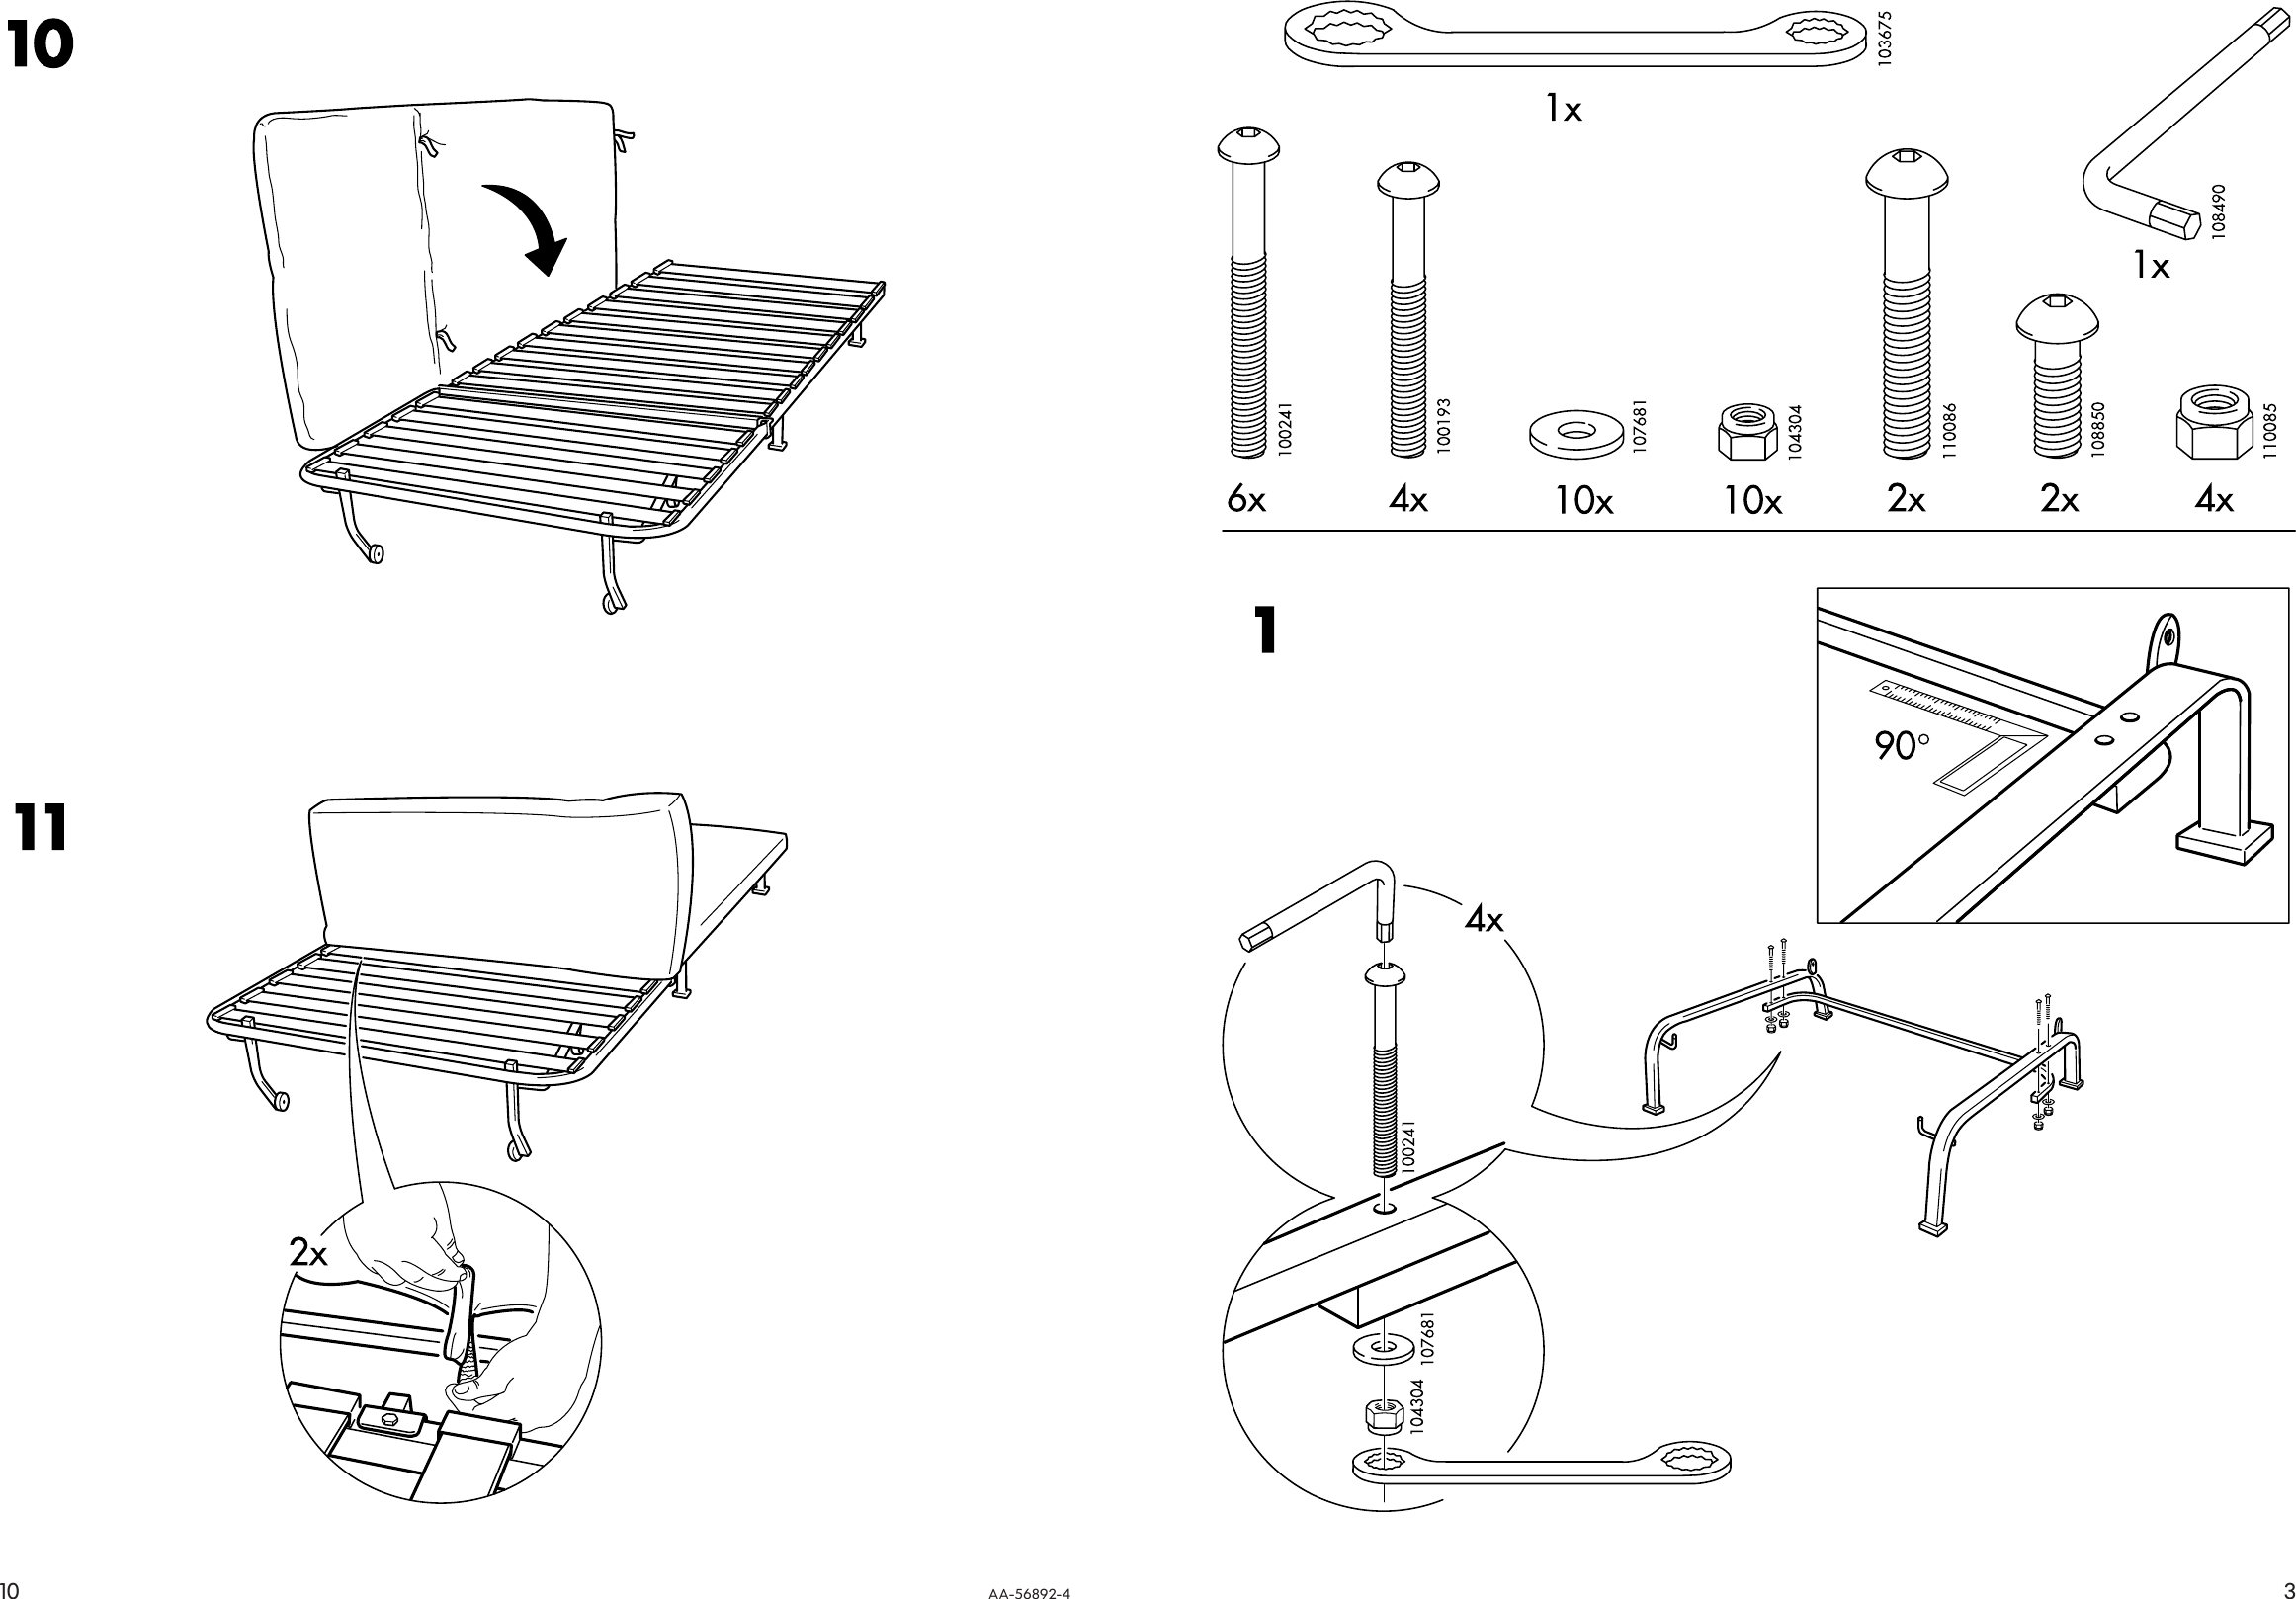 Page 3 of 6 - Ikea Ikea-Lycksele-Frame-Chair-Bed-Assembly-Instruction